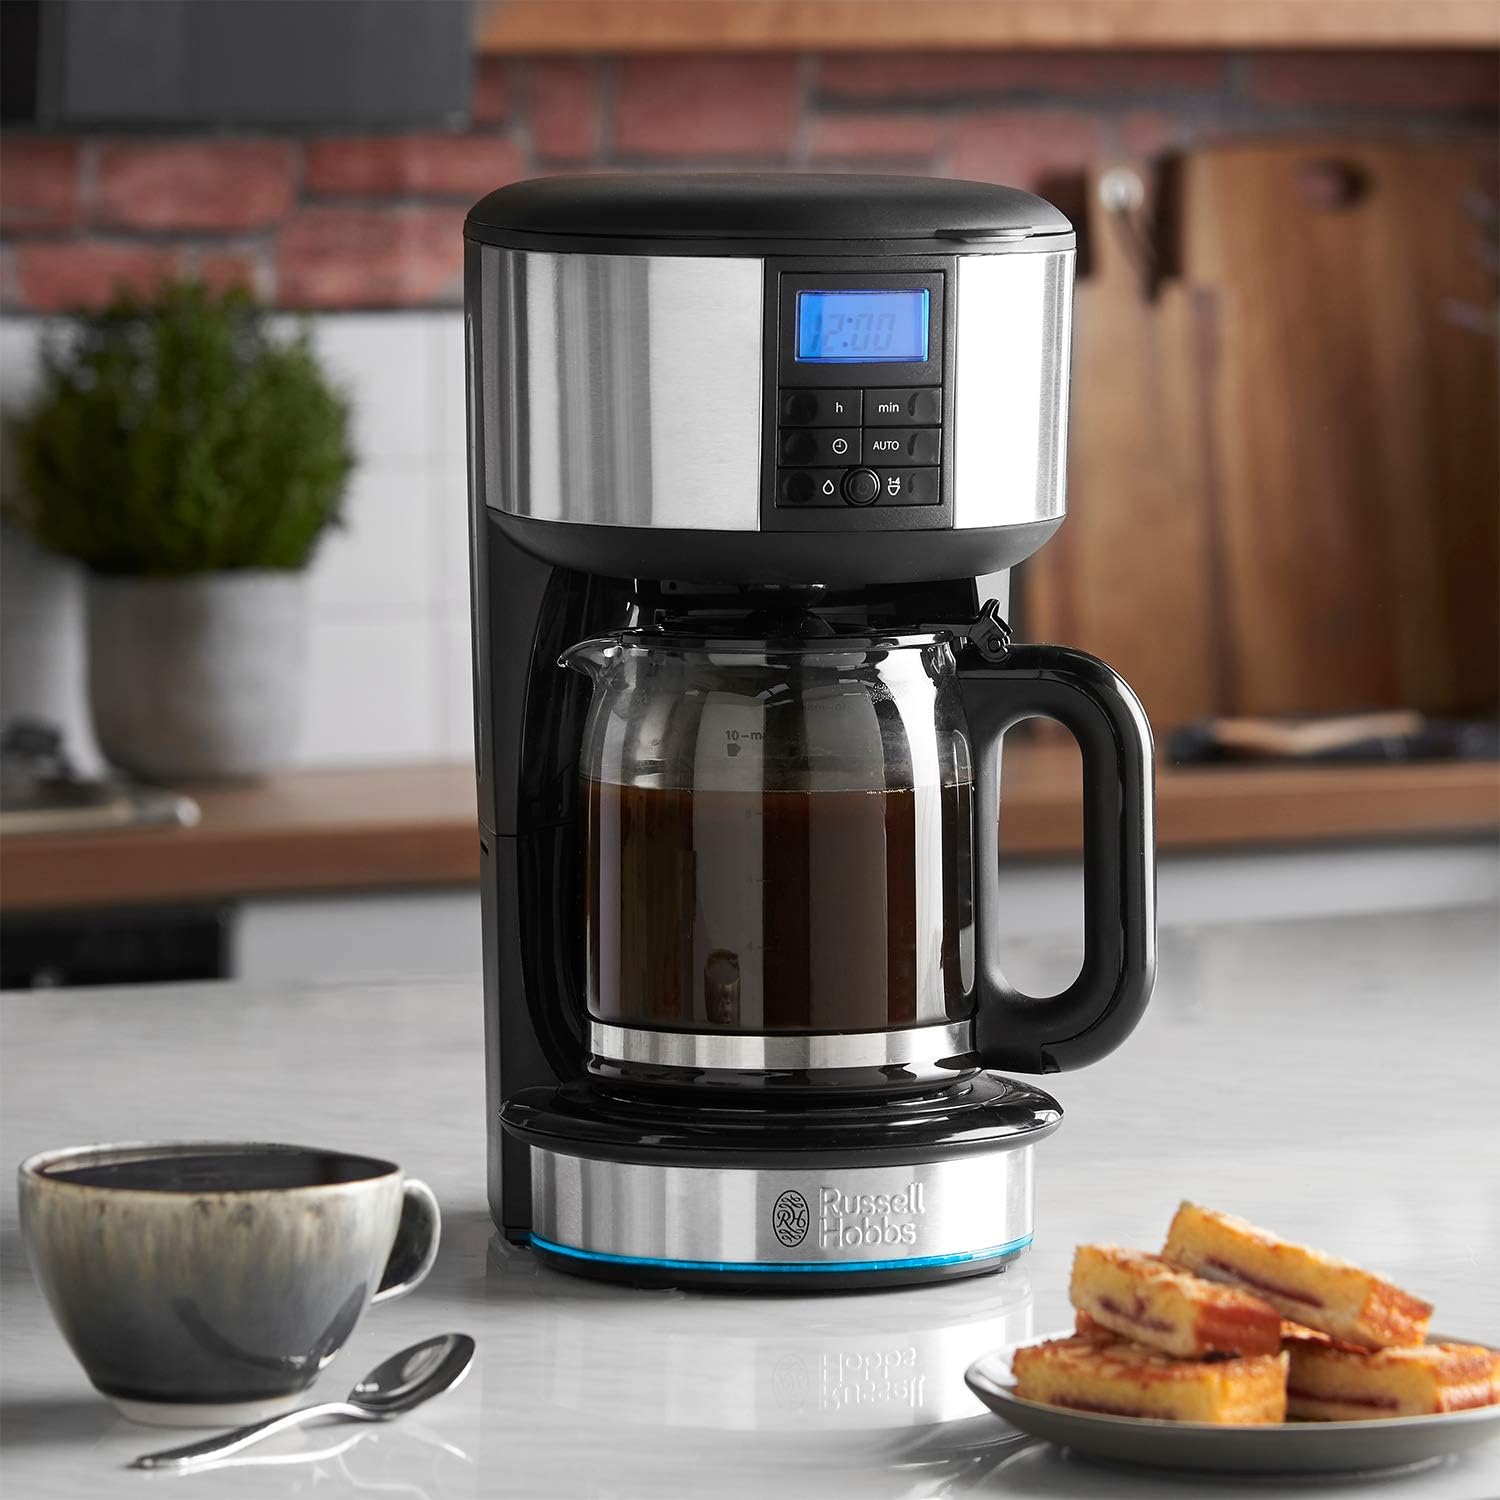 Russell Hobbs Buckingham Filter Coffee Maker, 1000Watts, 1.25 Litre, 24-hour programmable timer, 50% faster, 2-4 cup option, auto clean feature, 20680 - Black, 1 year warranty